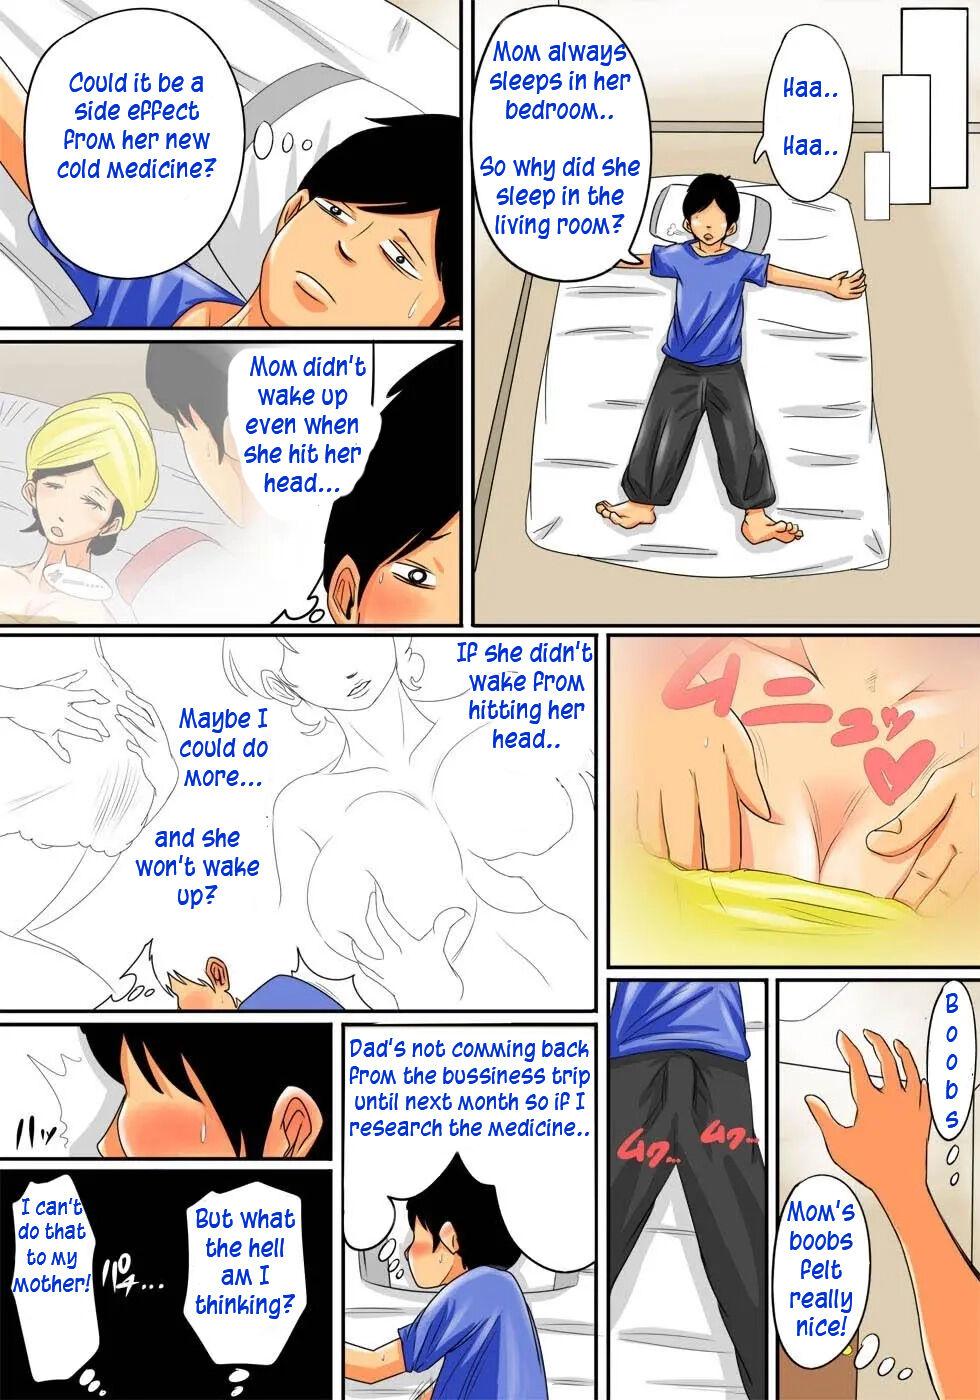 Perrito The Mother Who Fell Asleep - Original Sex Tape - Page 6